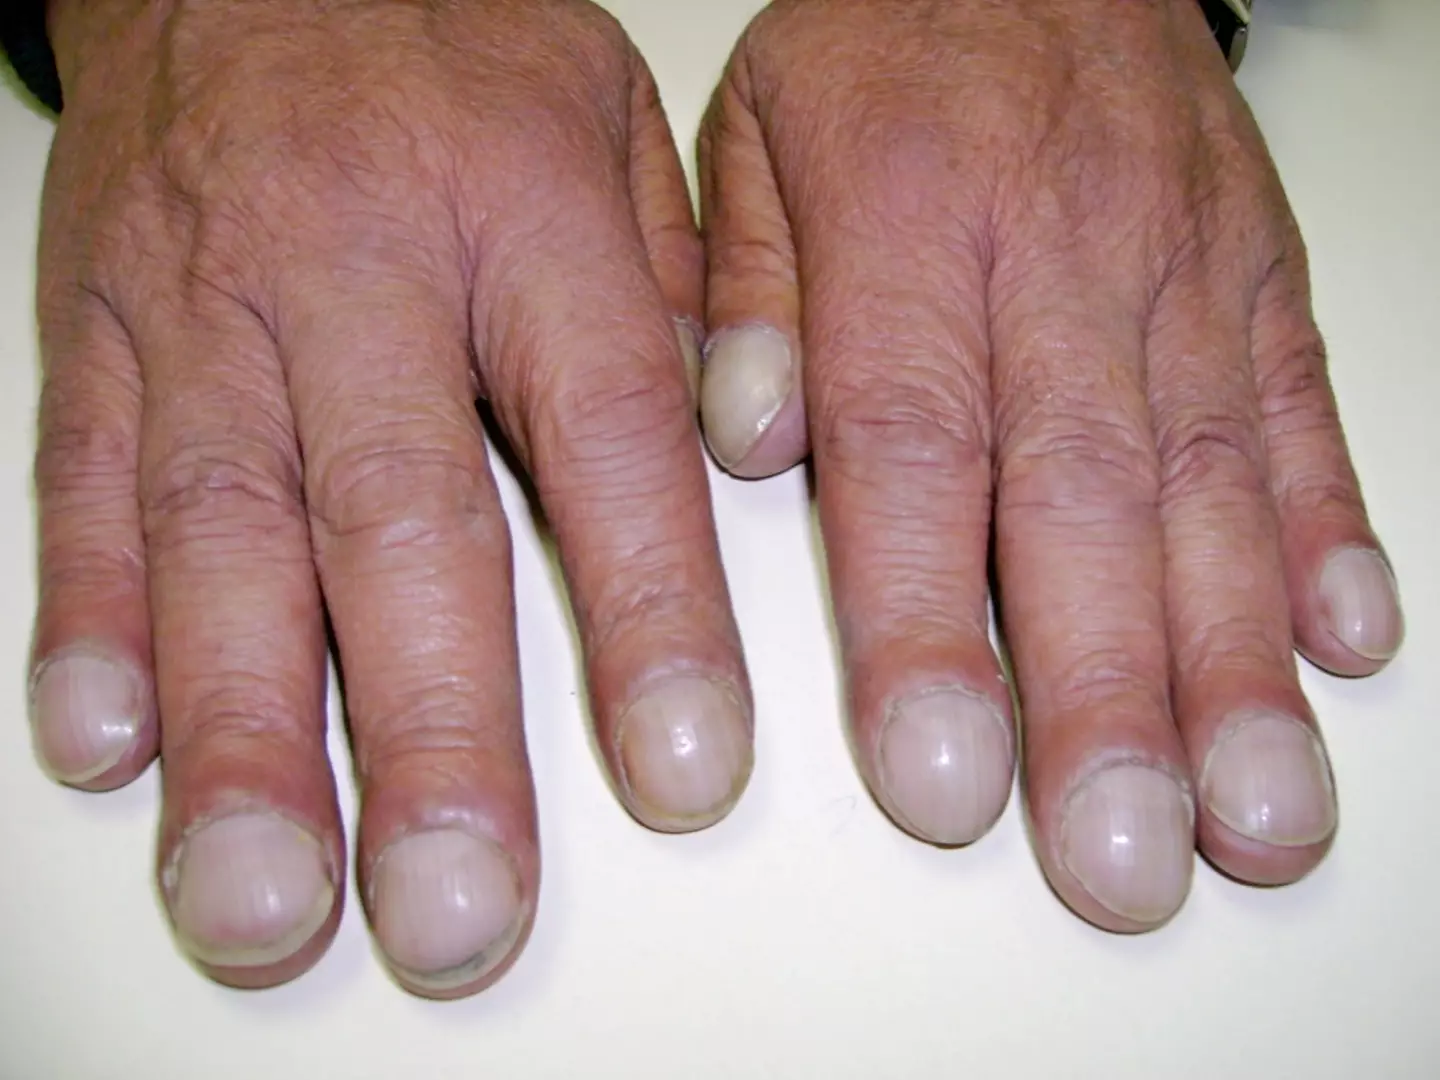 An example of finger clubbing, note the enlarged ends of the fingers and the curved nails. (Desherinka - Own work, CC BY-SA 4.0)